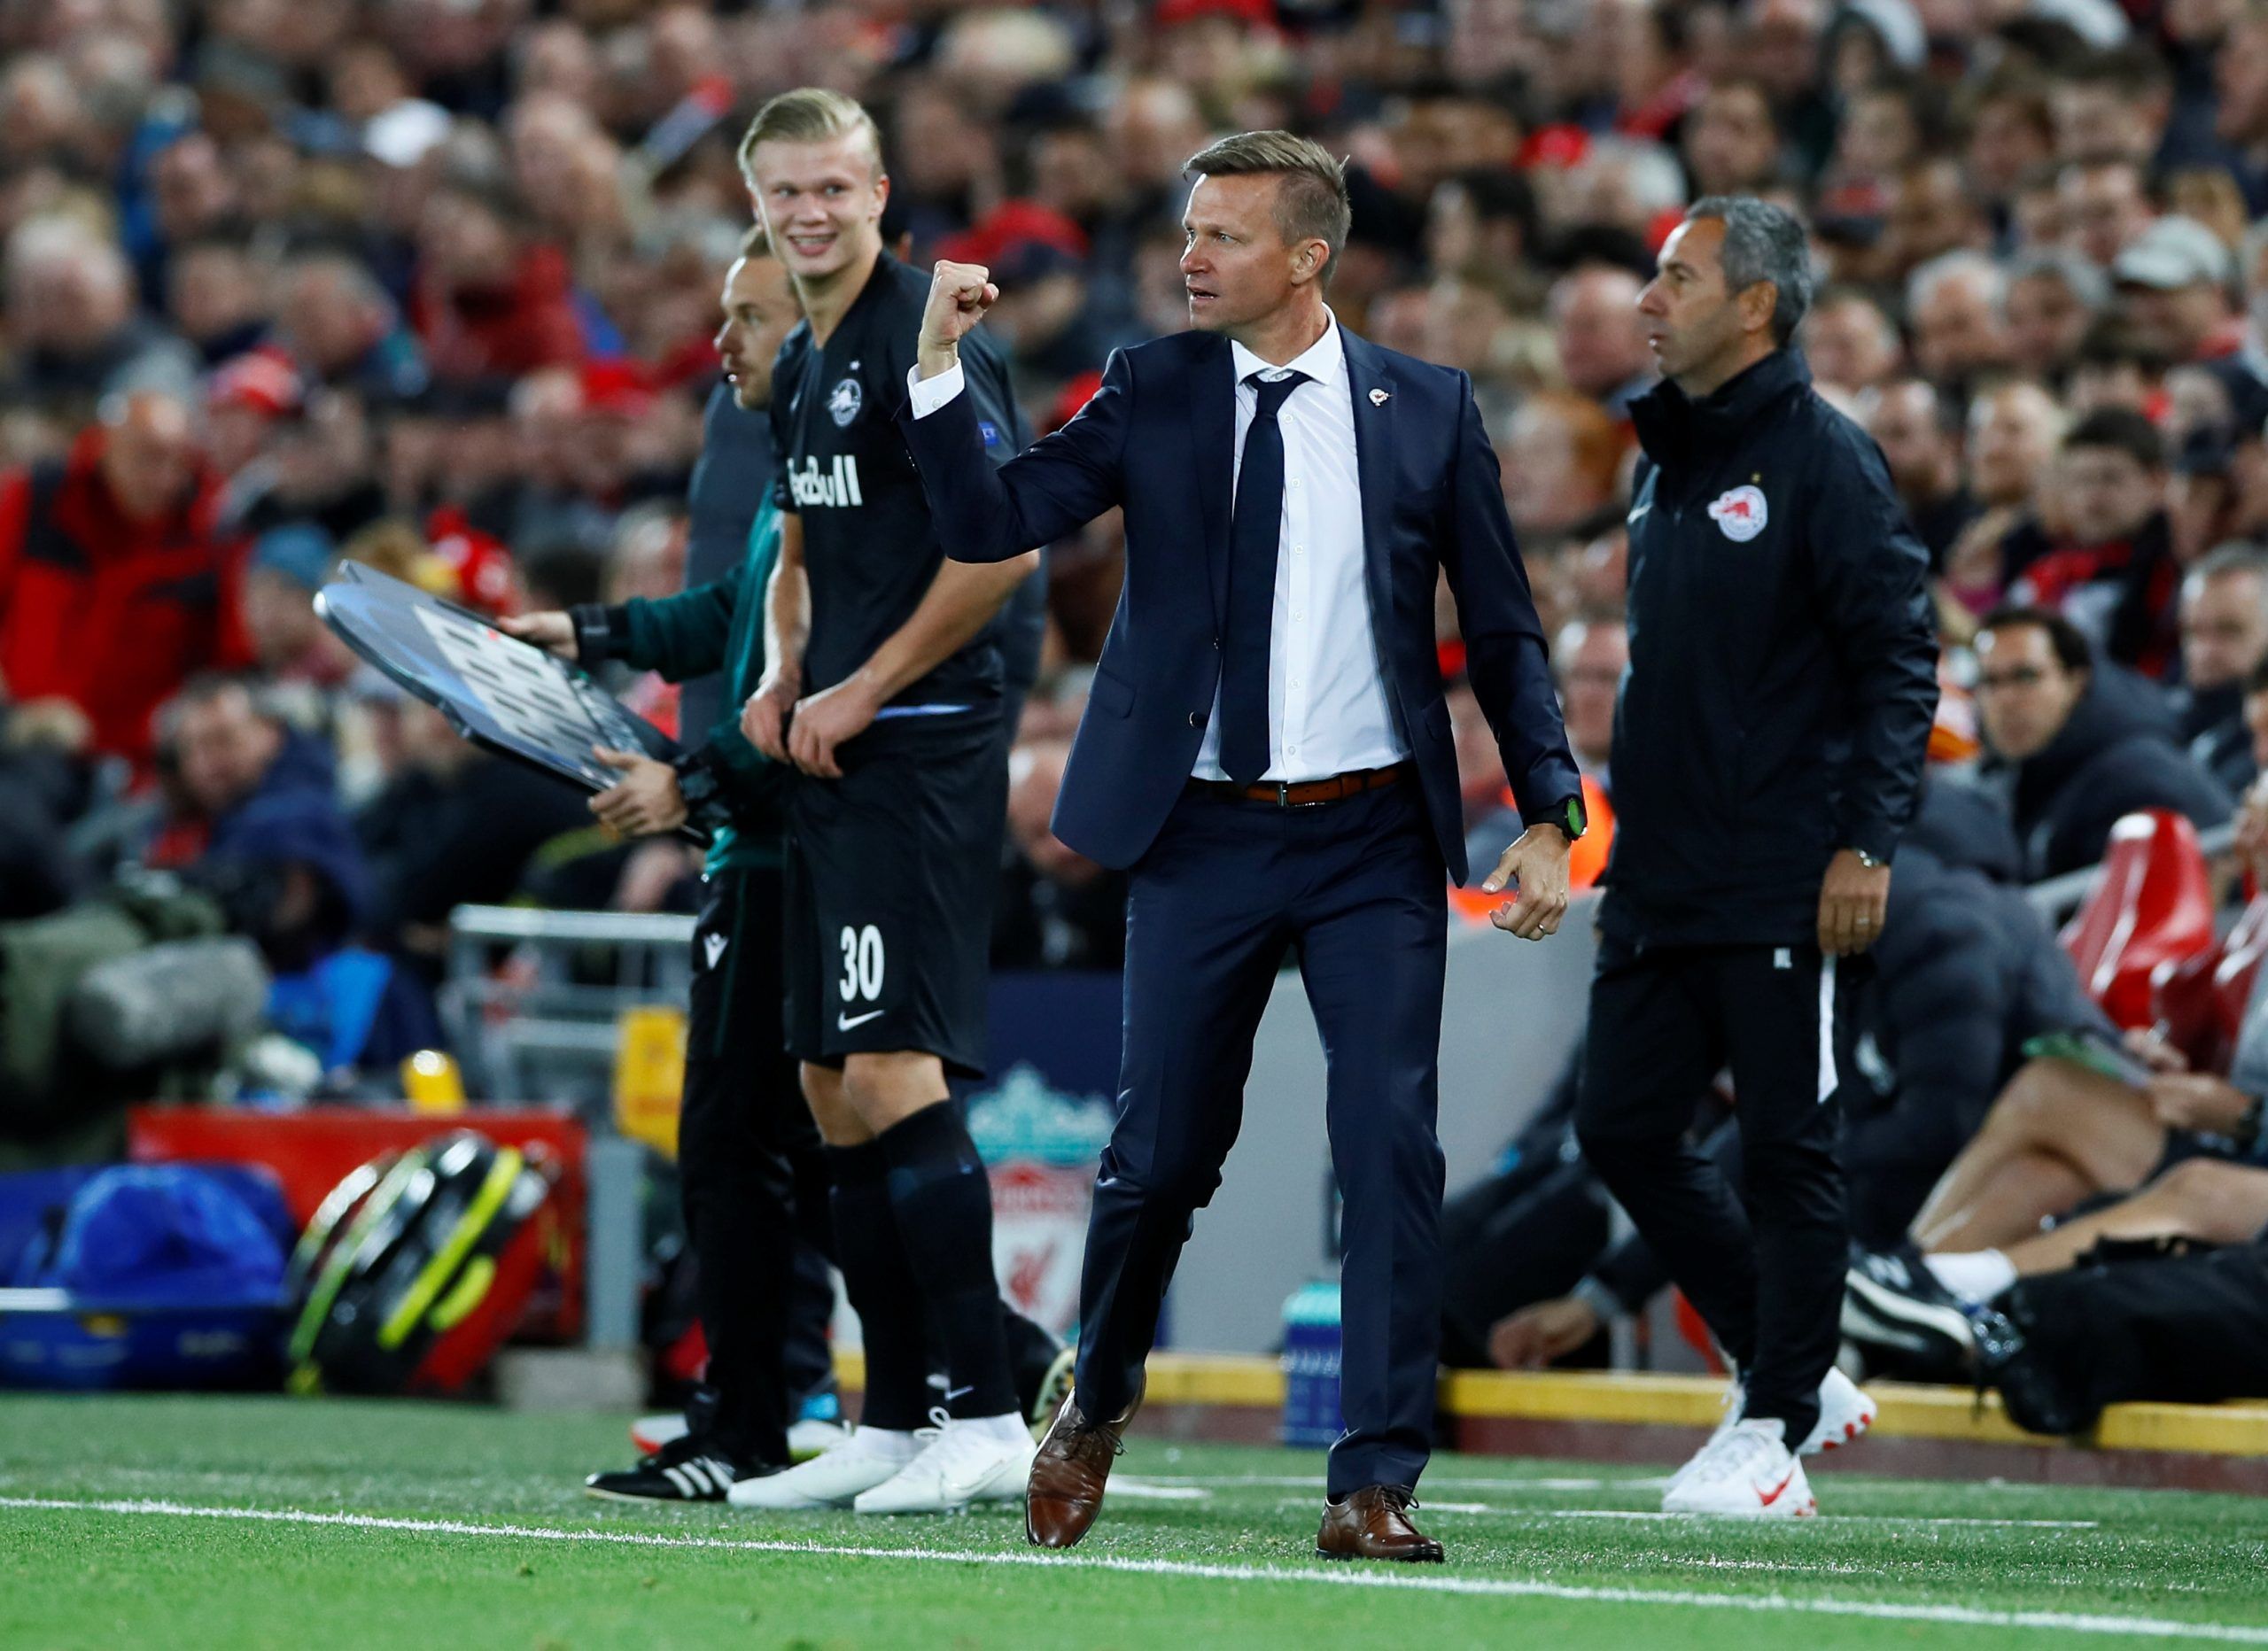 Soccer Football - Champions League - Group E - Liverpool v FC Salzburg - Anfield, Liverpool, Britain - October 2, 2019  FC Salzburg coach Jesse Marsch celebrates their second goal scored by Takumi Minamino as FC Salzburg's Erling Braut Haaland prepares to come on as a substitute                       Action Images via Reuters/Jason Cairnduff